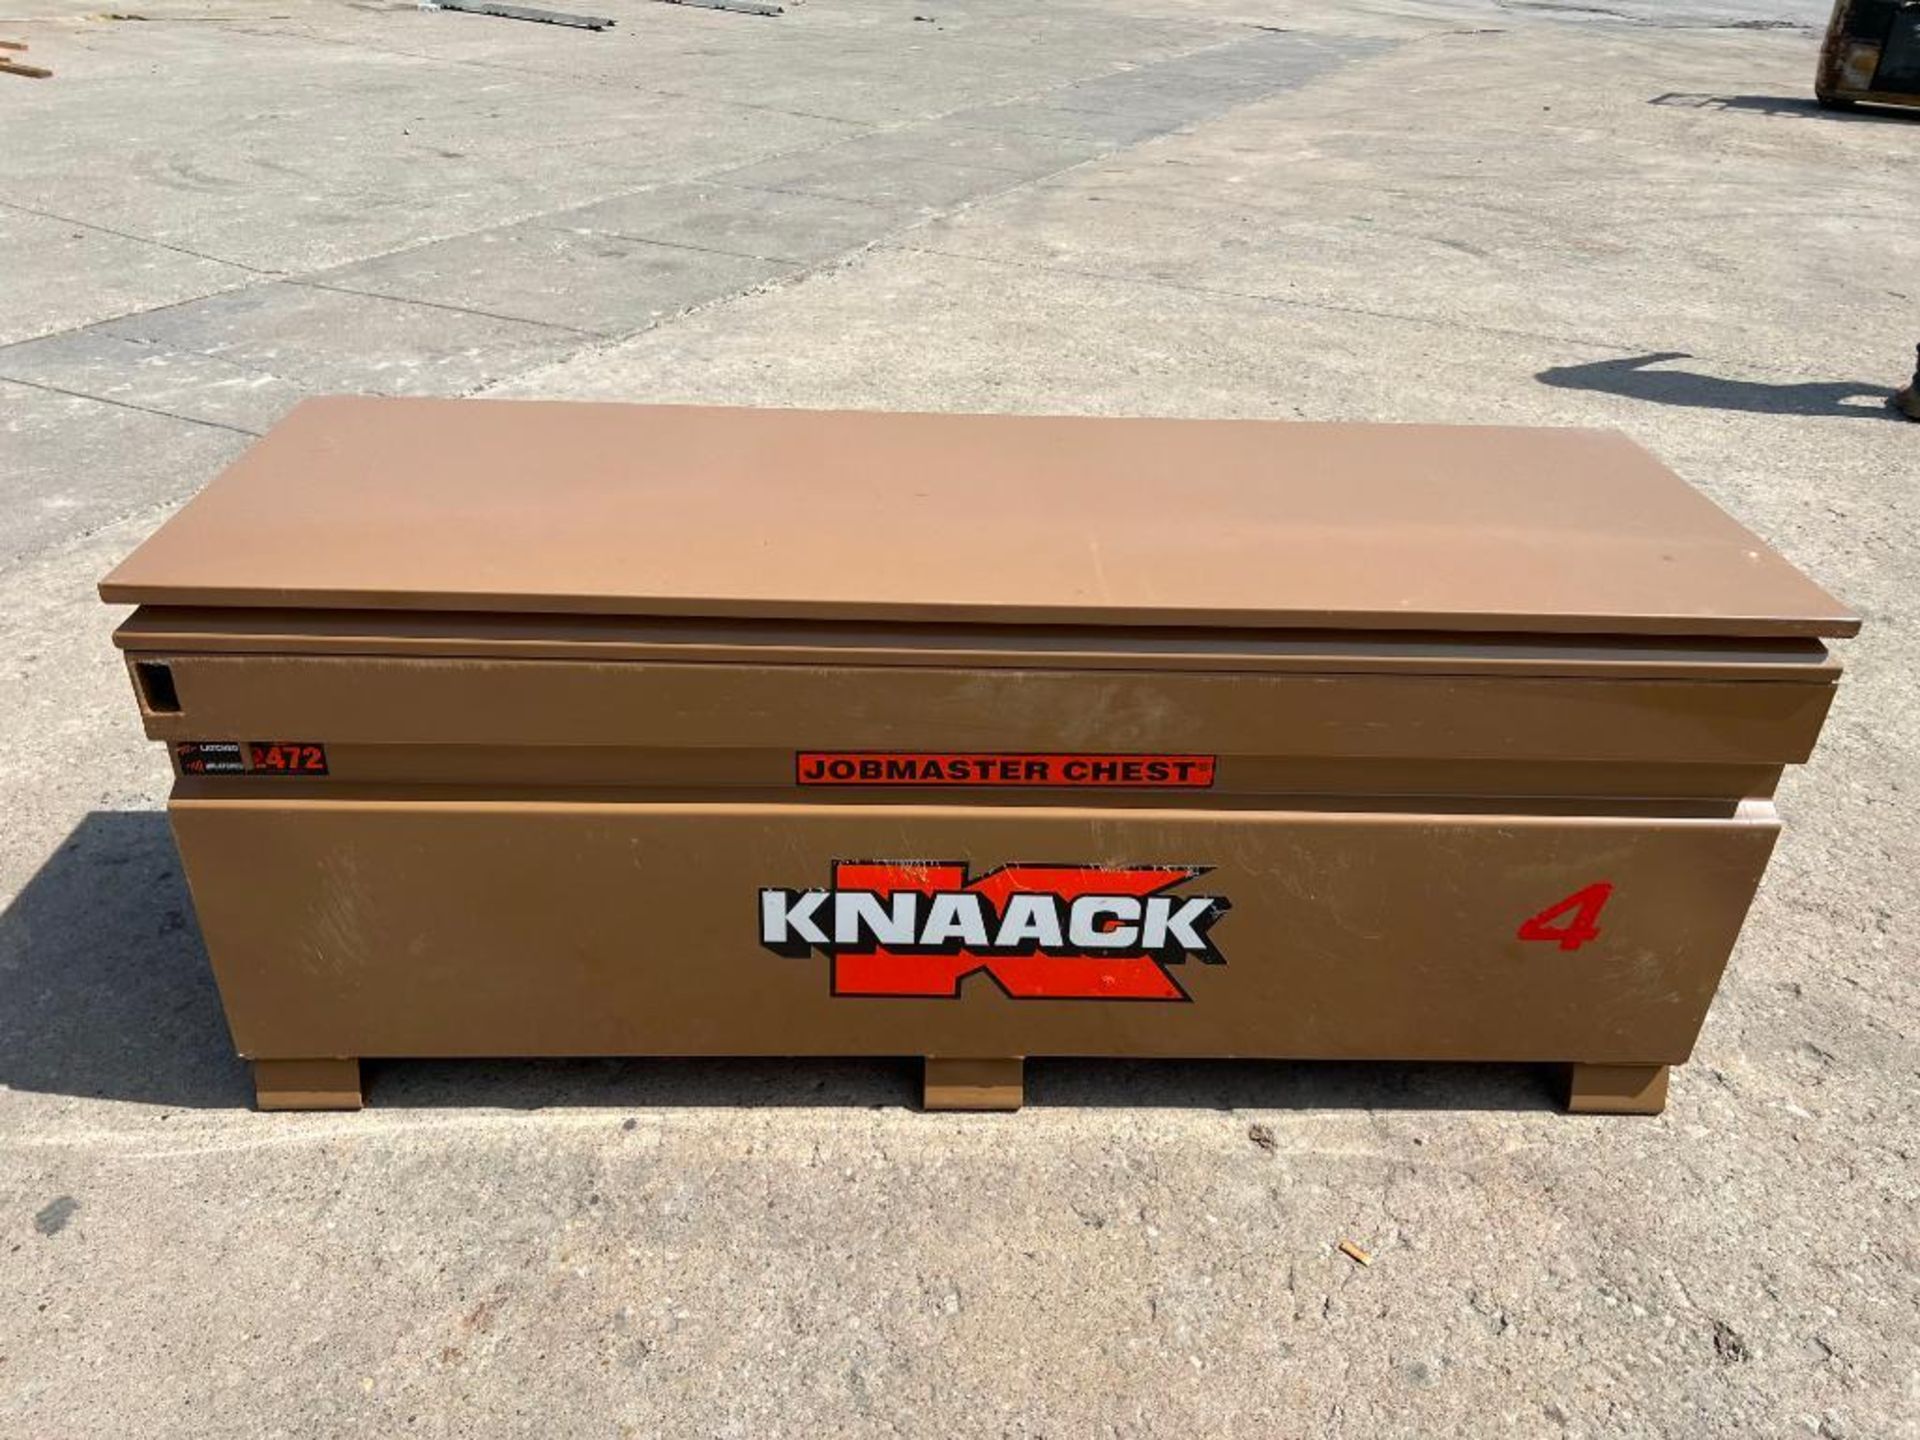 Knaack Jobmaster Chest, Model #2472, Serial #2210917032. Located in Mt. Pleasant, IA